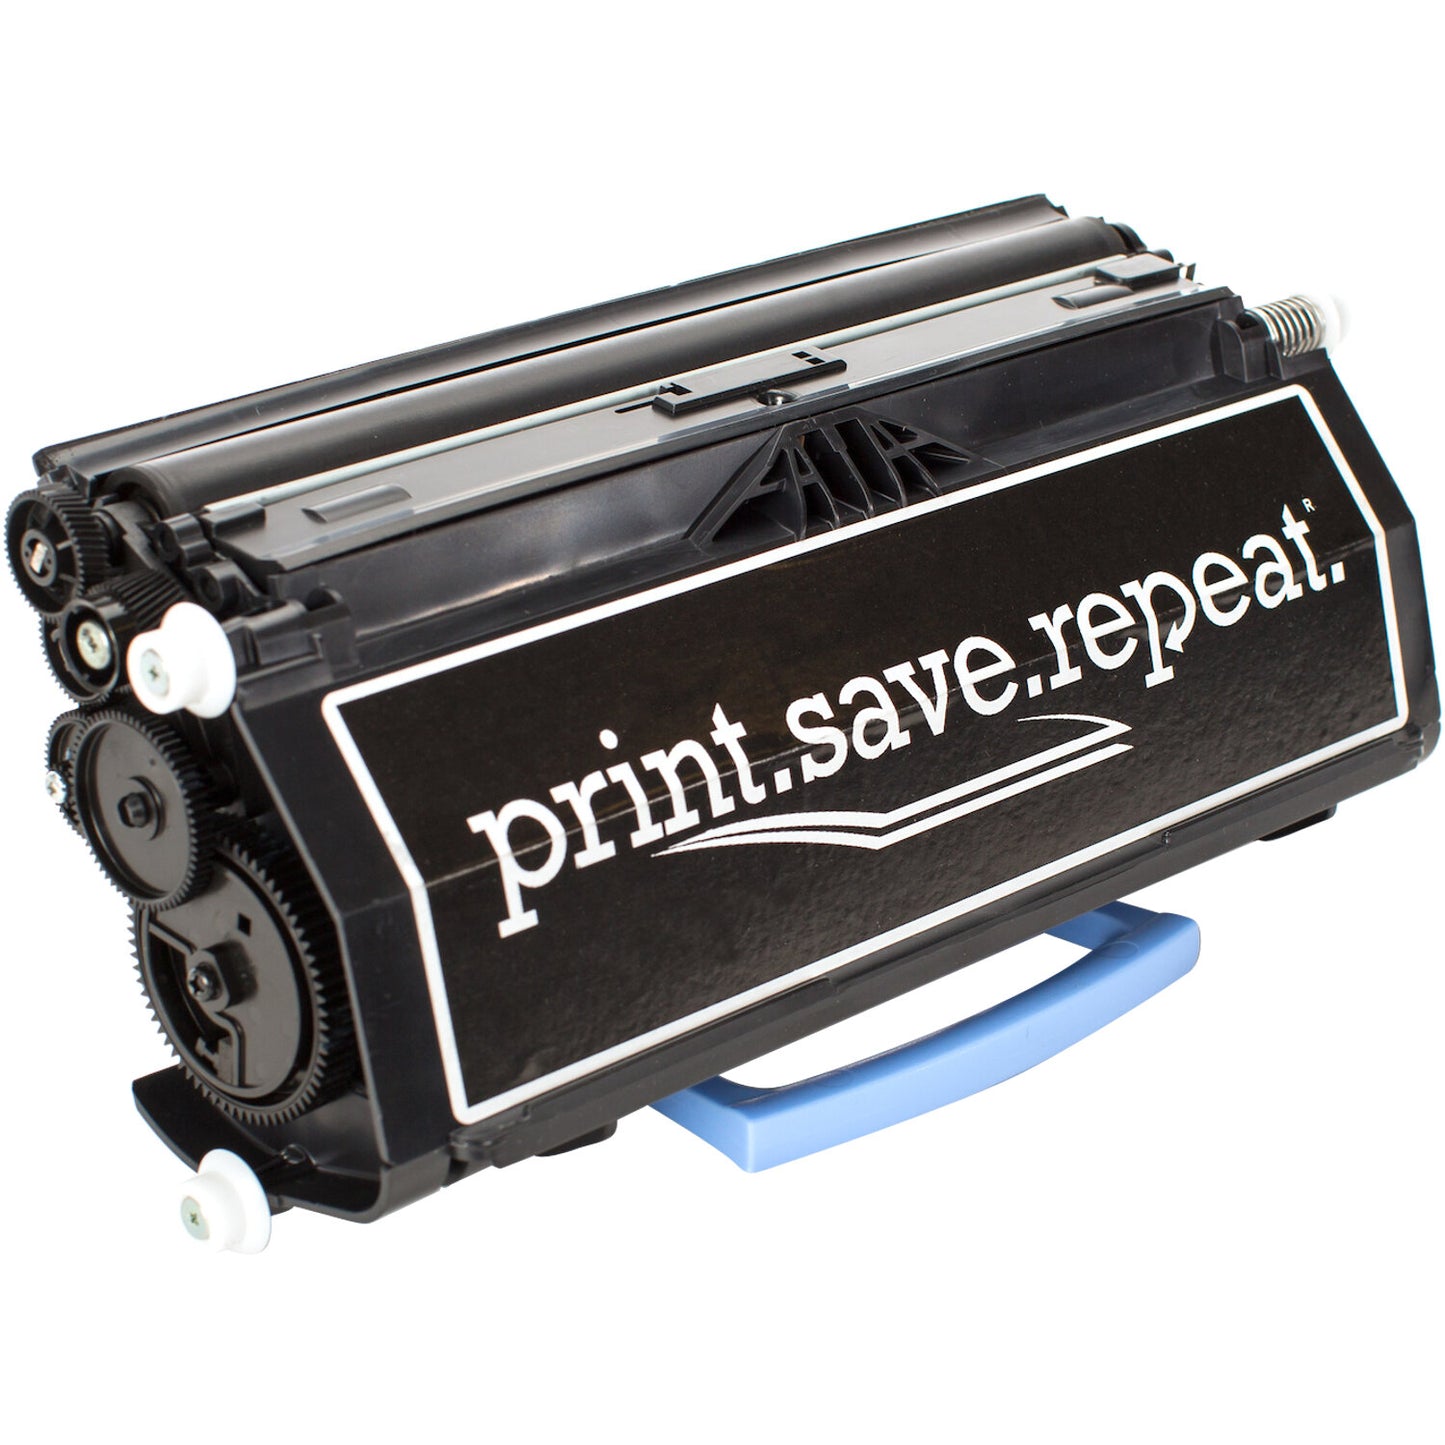 Print.Save.Repeat. Lexmark E460X21A Extra High Yield Remanufactured Toner Cartridge for E460, E462 [15,000 Pages]